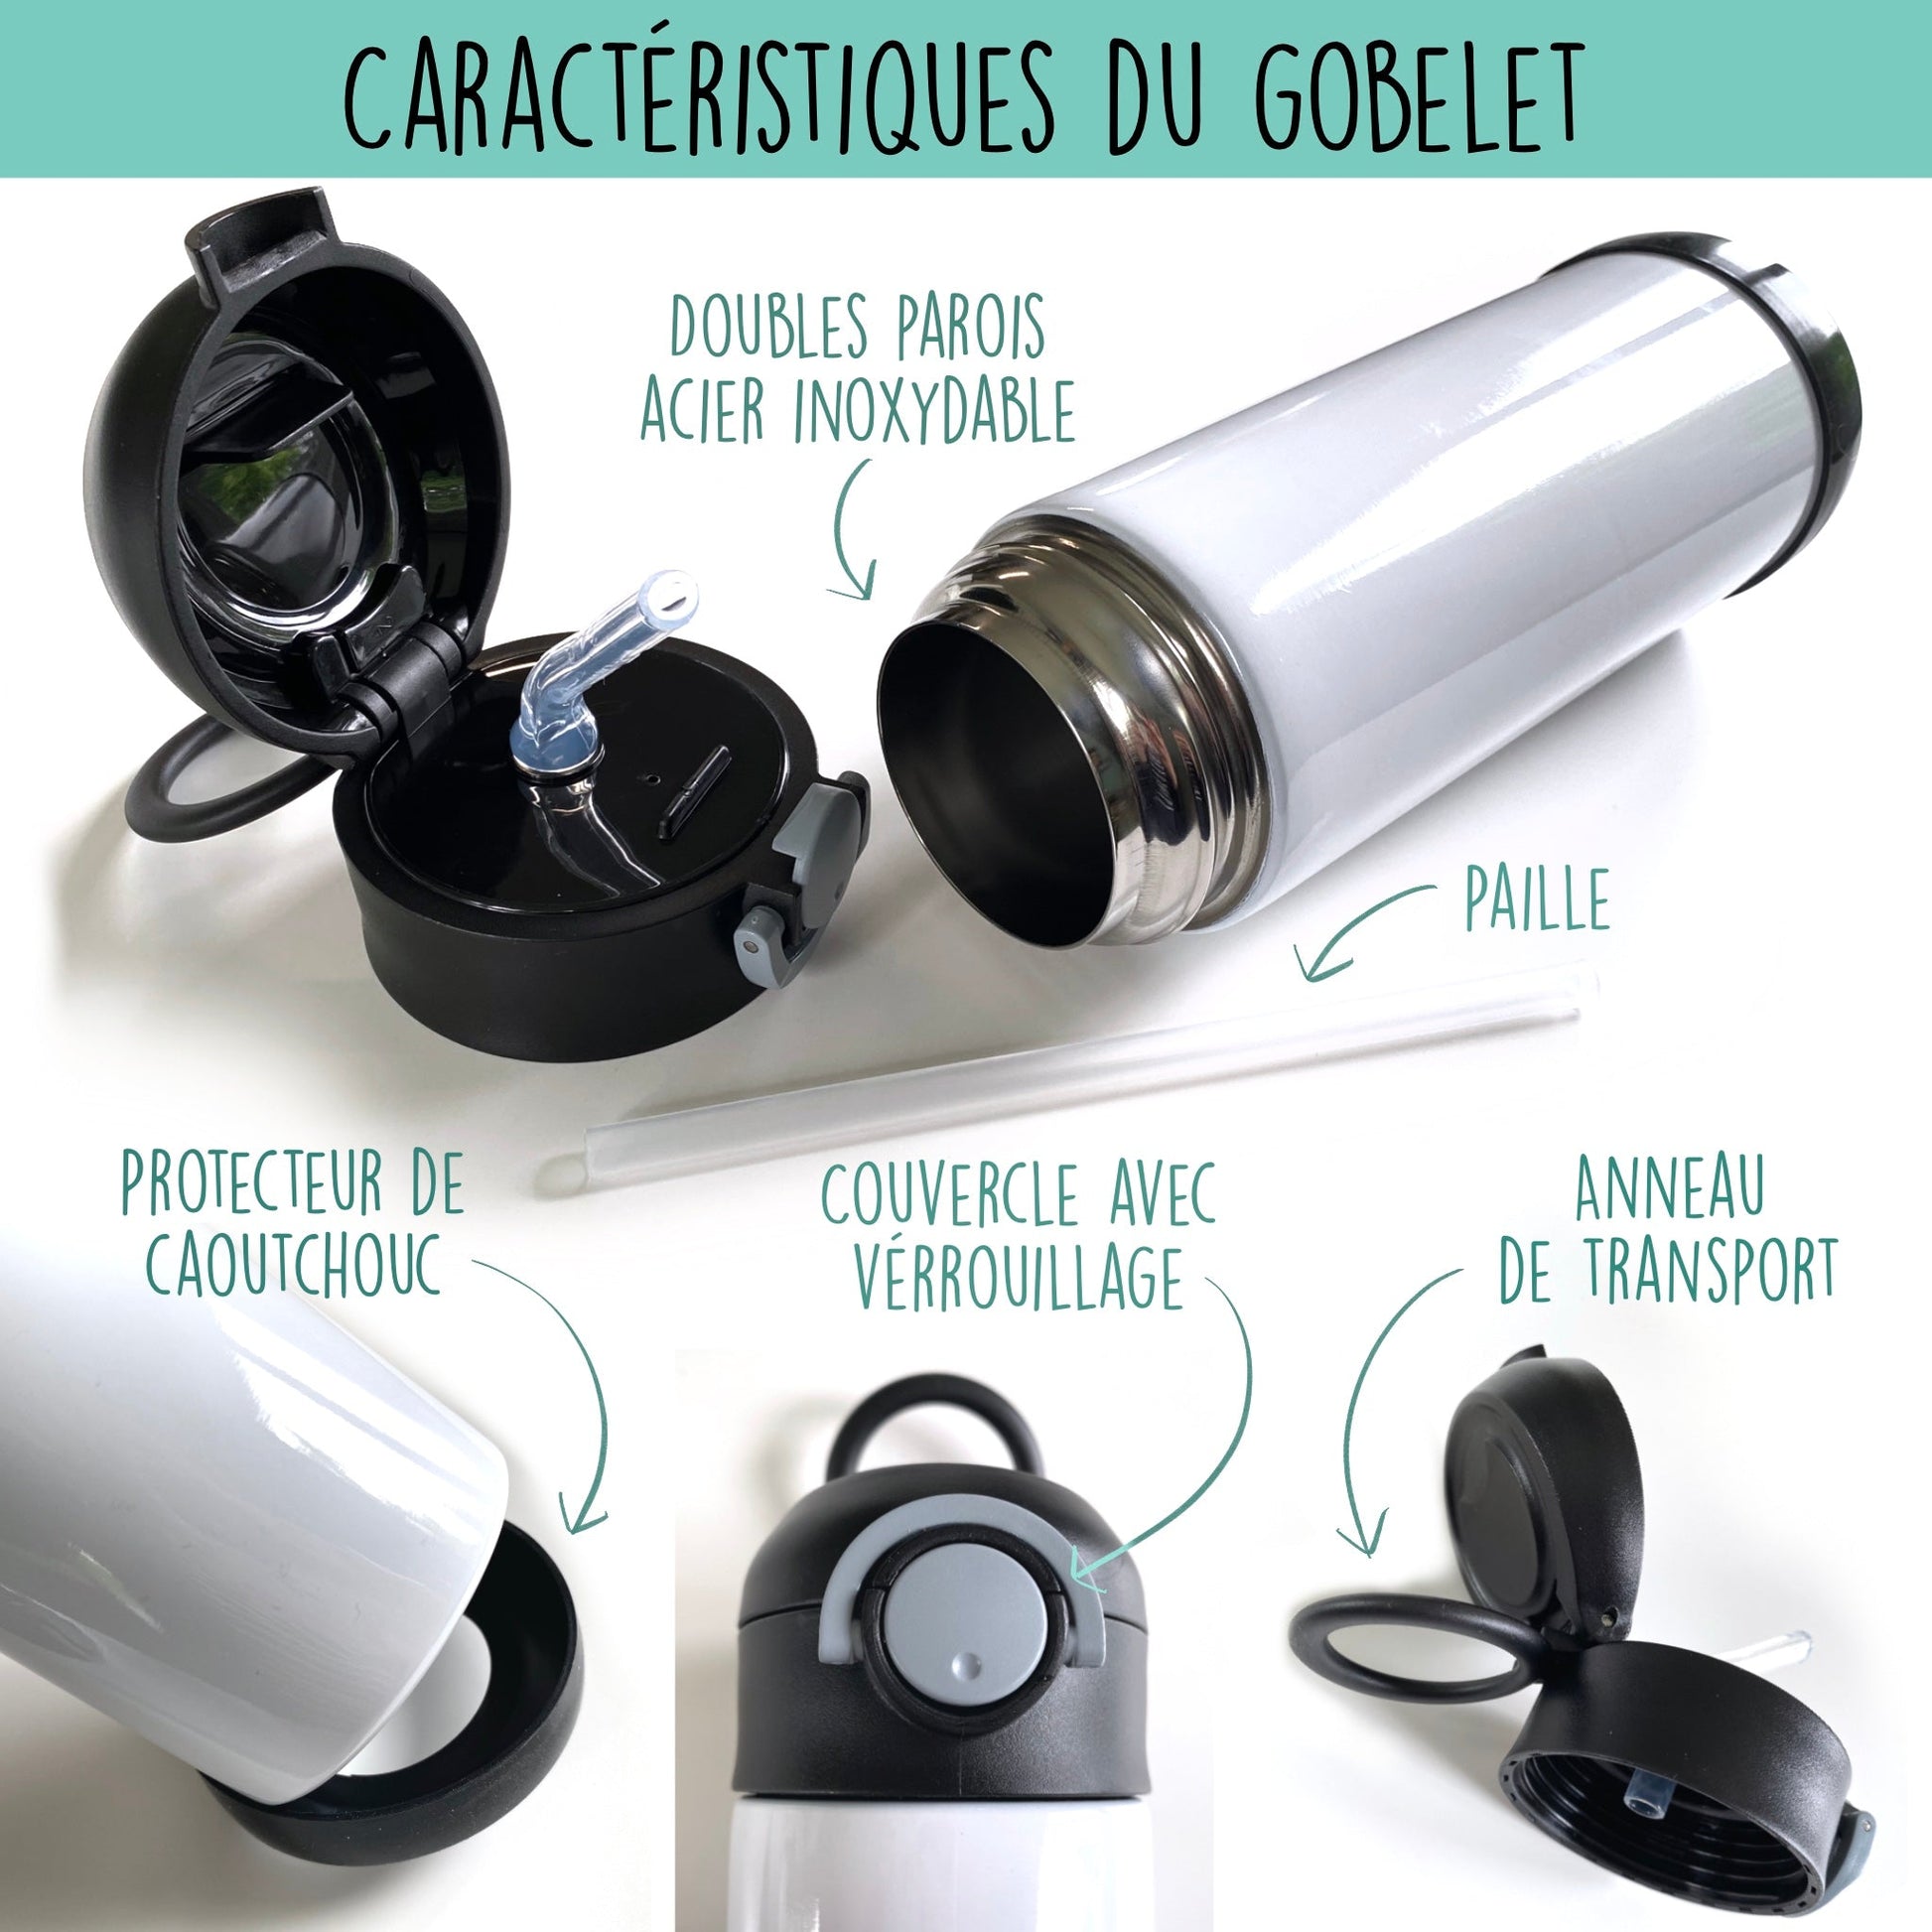 Gourde thermos - Ah les crocos - Verre isotherme - Créations Odie